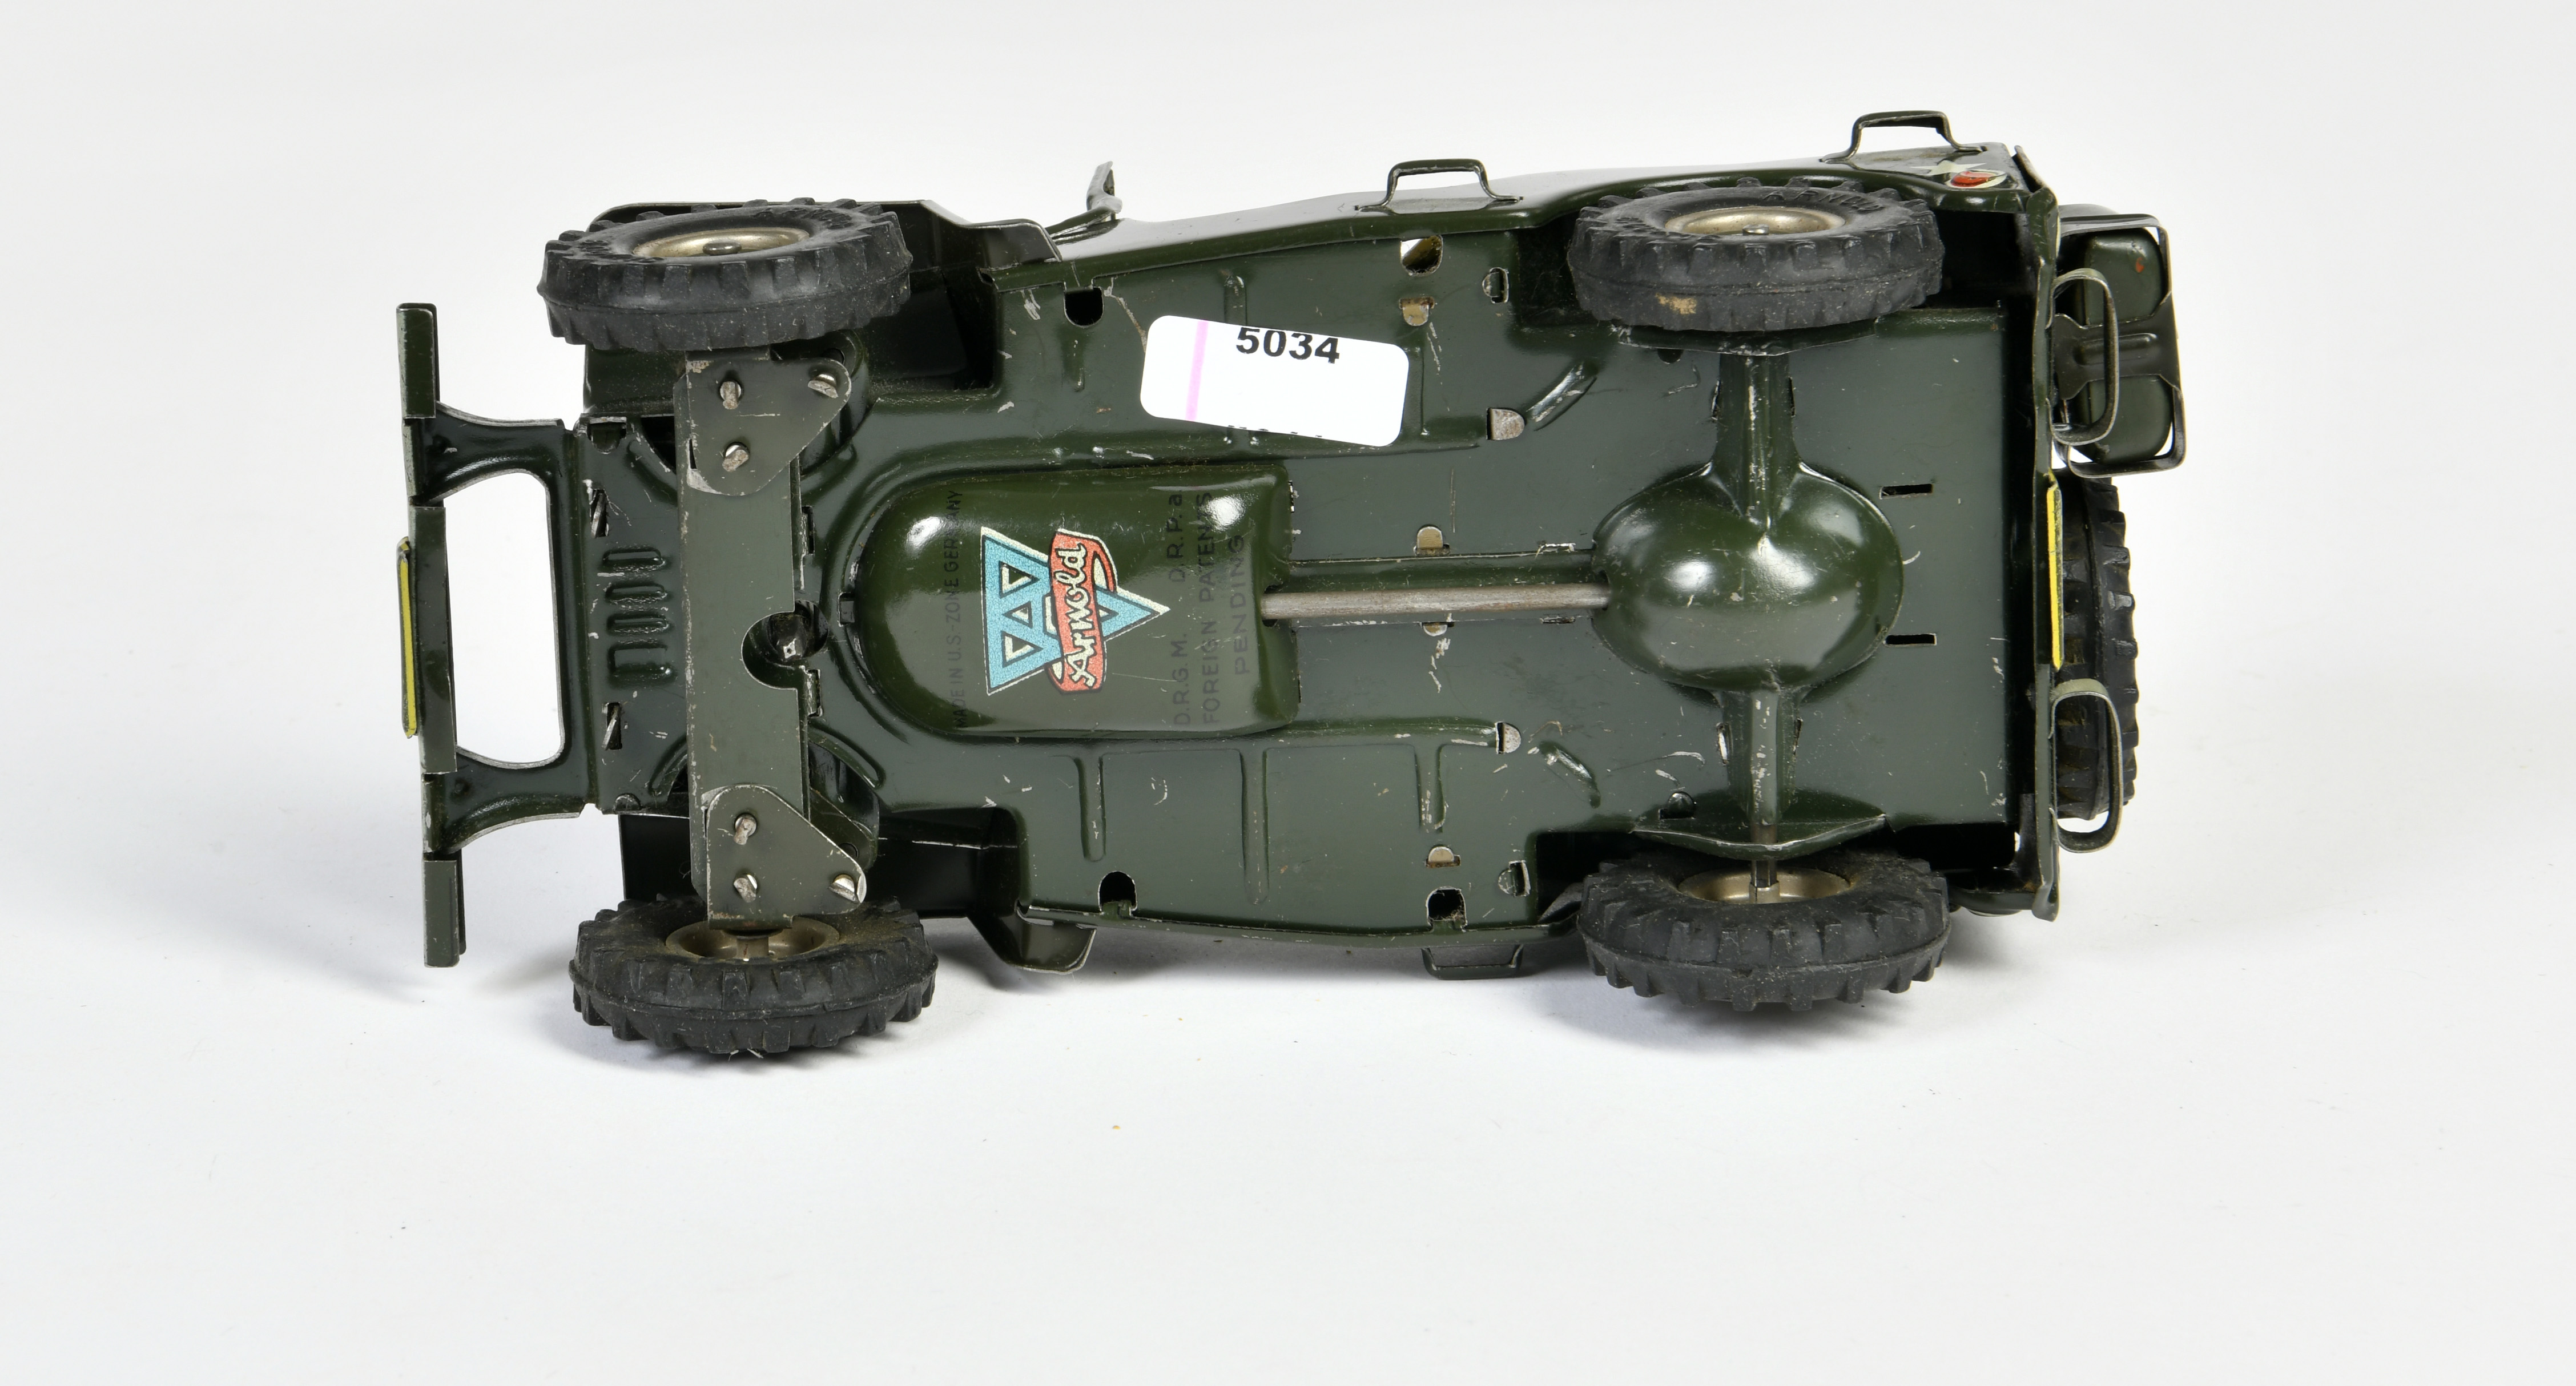 Arnold, Military Police Jeep 2500, US.-Zone Germany,, tin, cw ok, min. paint d., C 2+ - Image 3 of 3